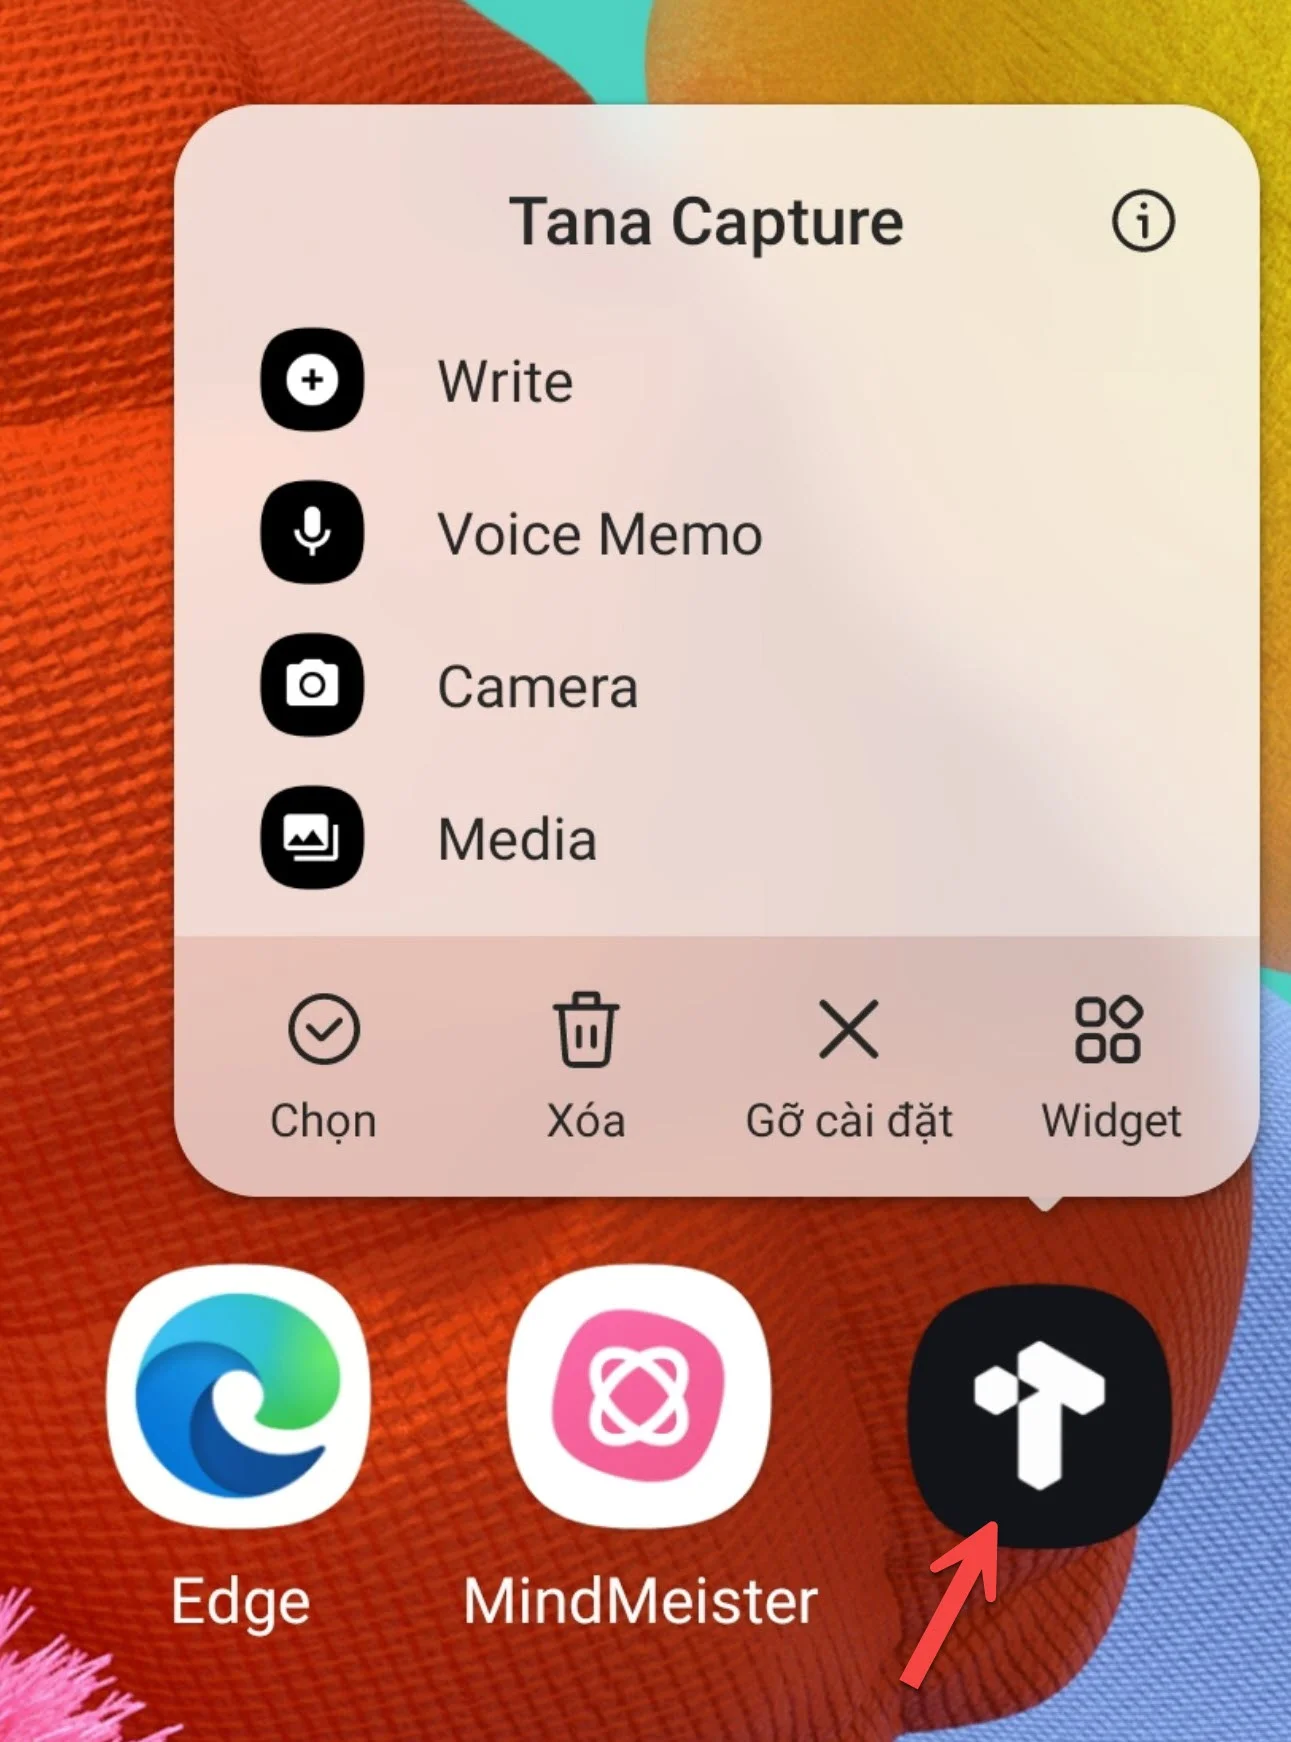 Click and hold on the Tana icon to get options